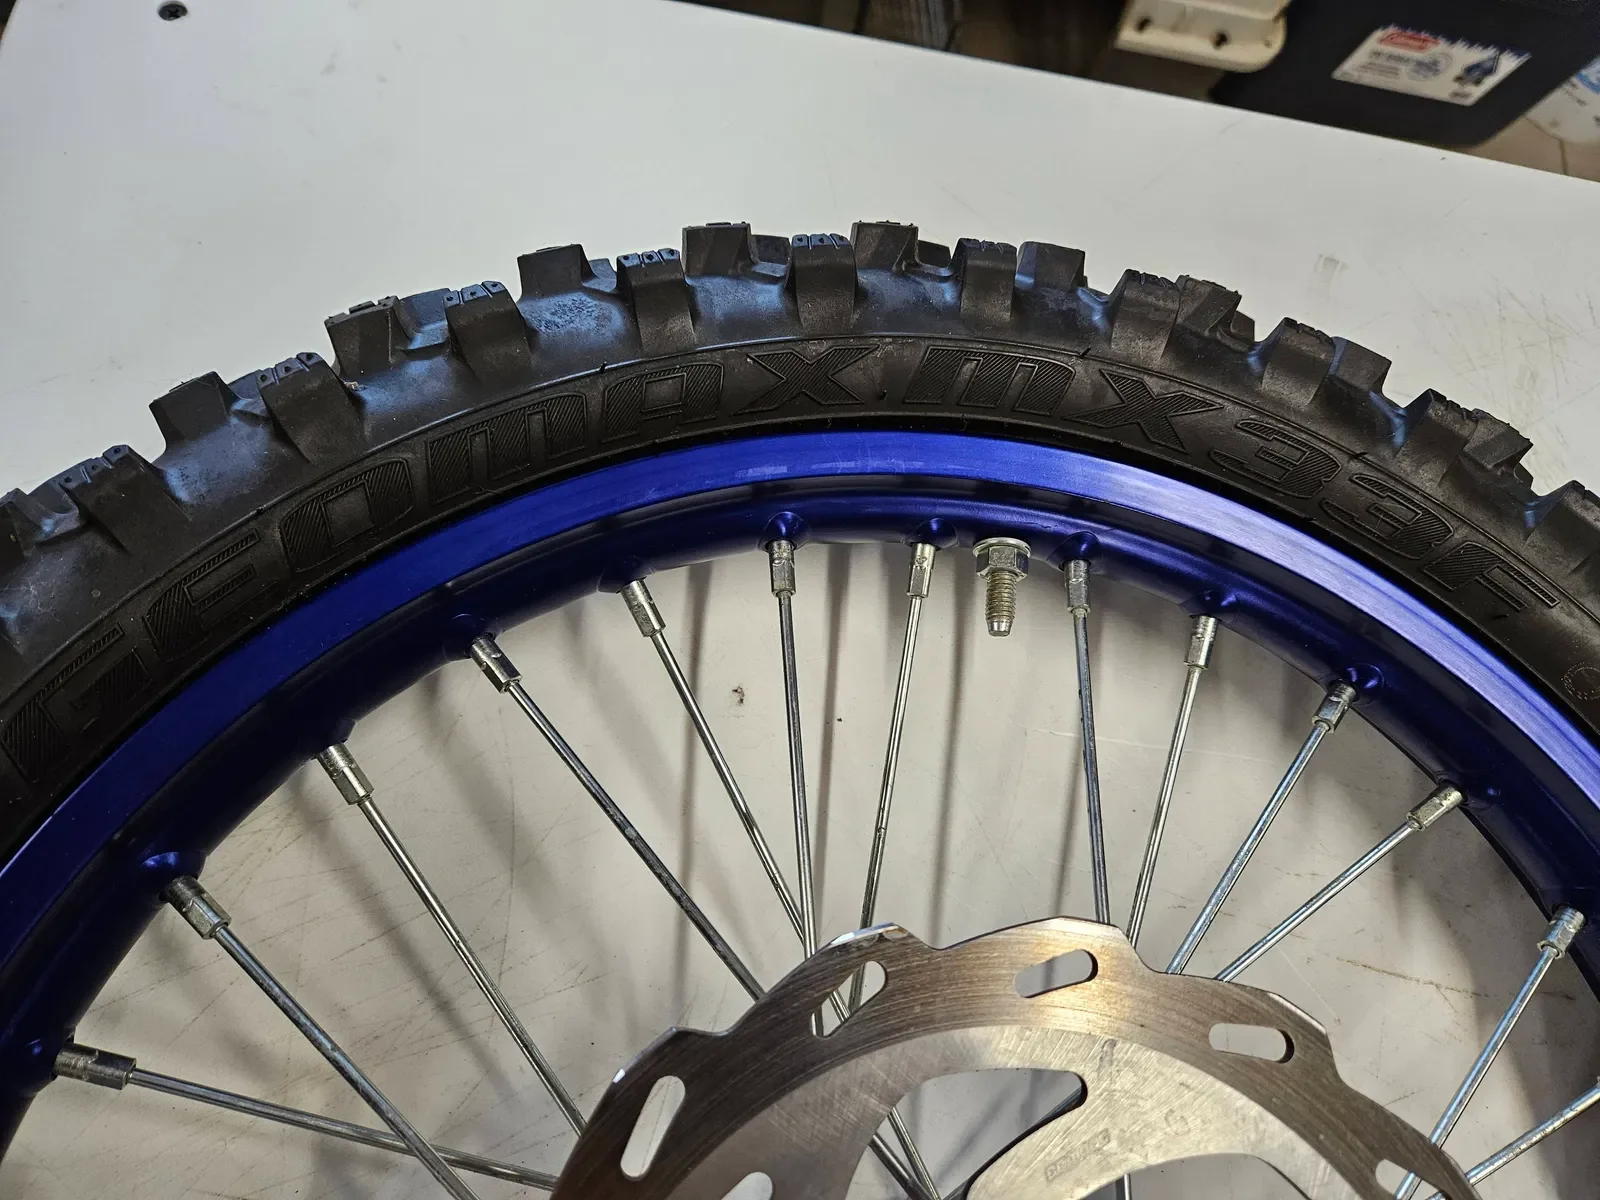 OEM Yz85 Small Front Complete Front Wheel